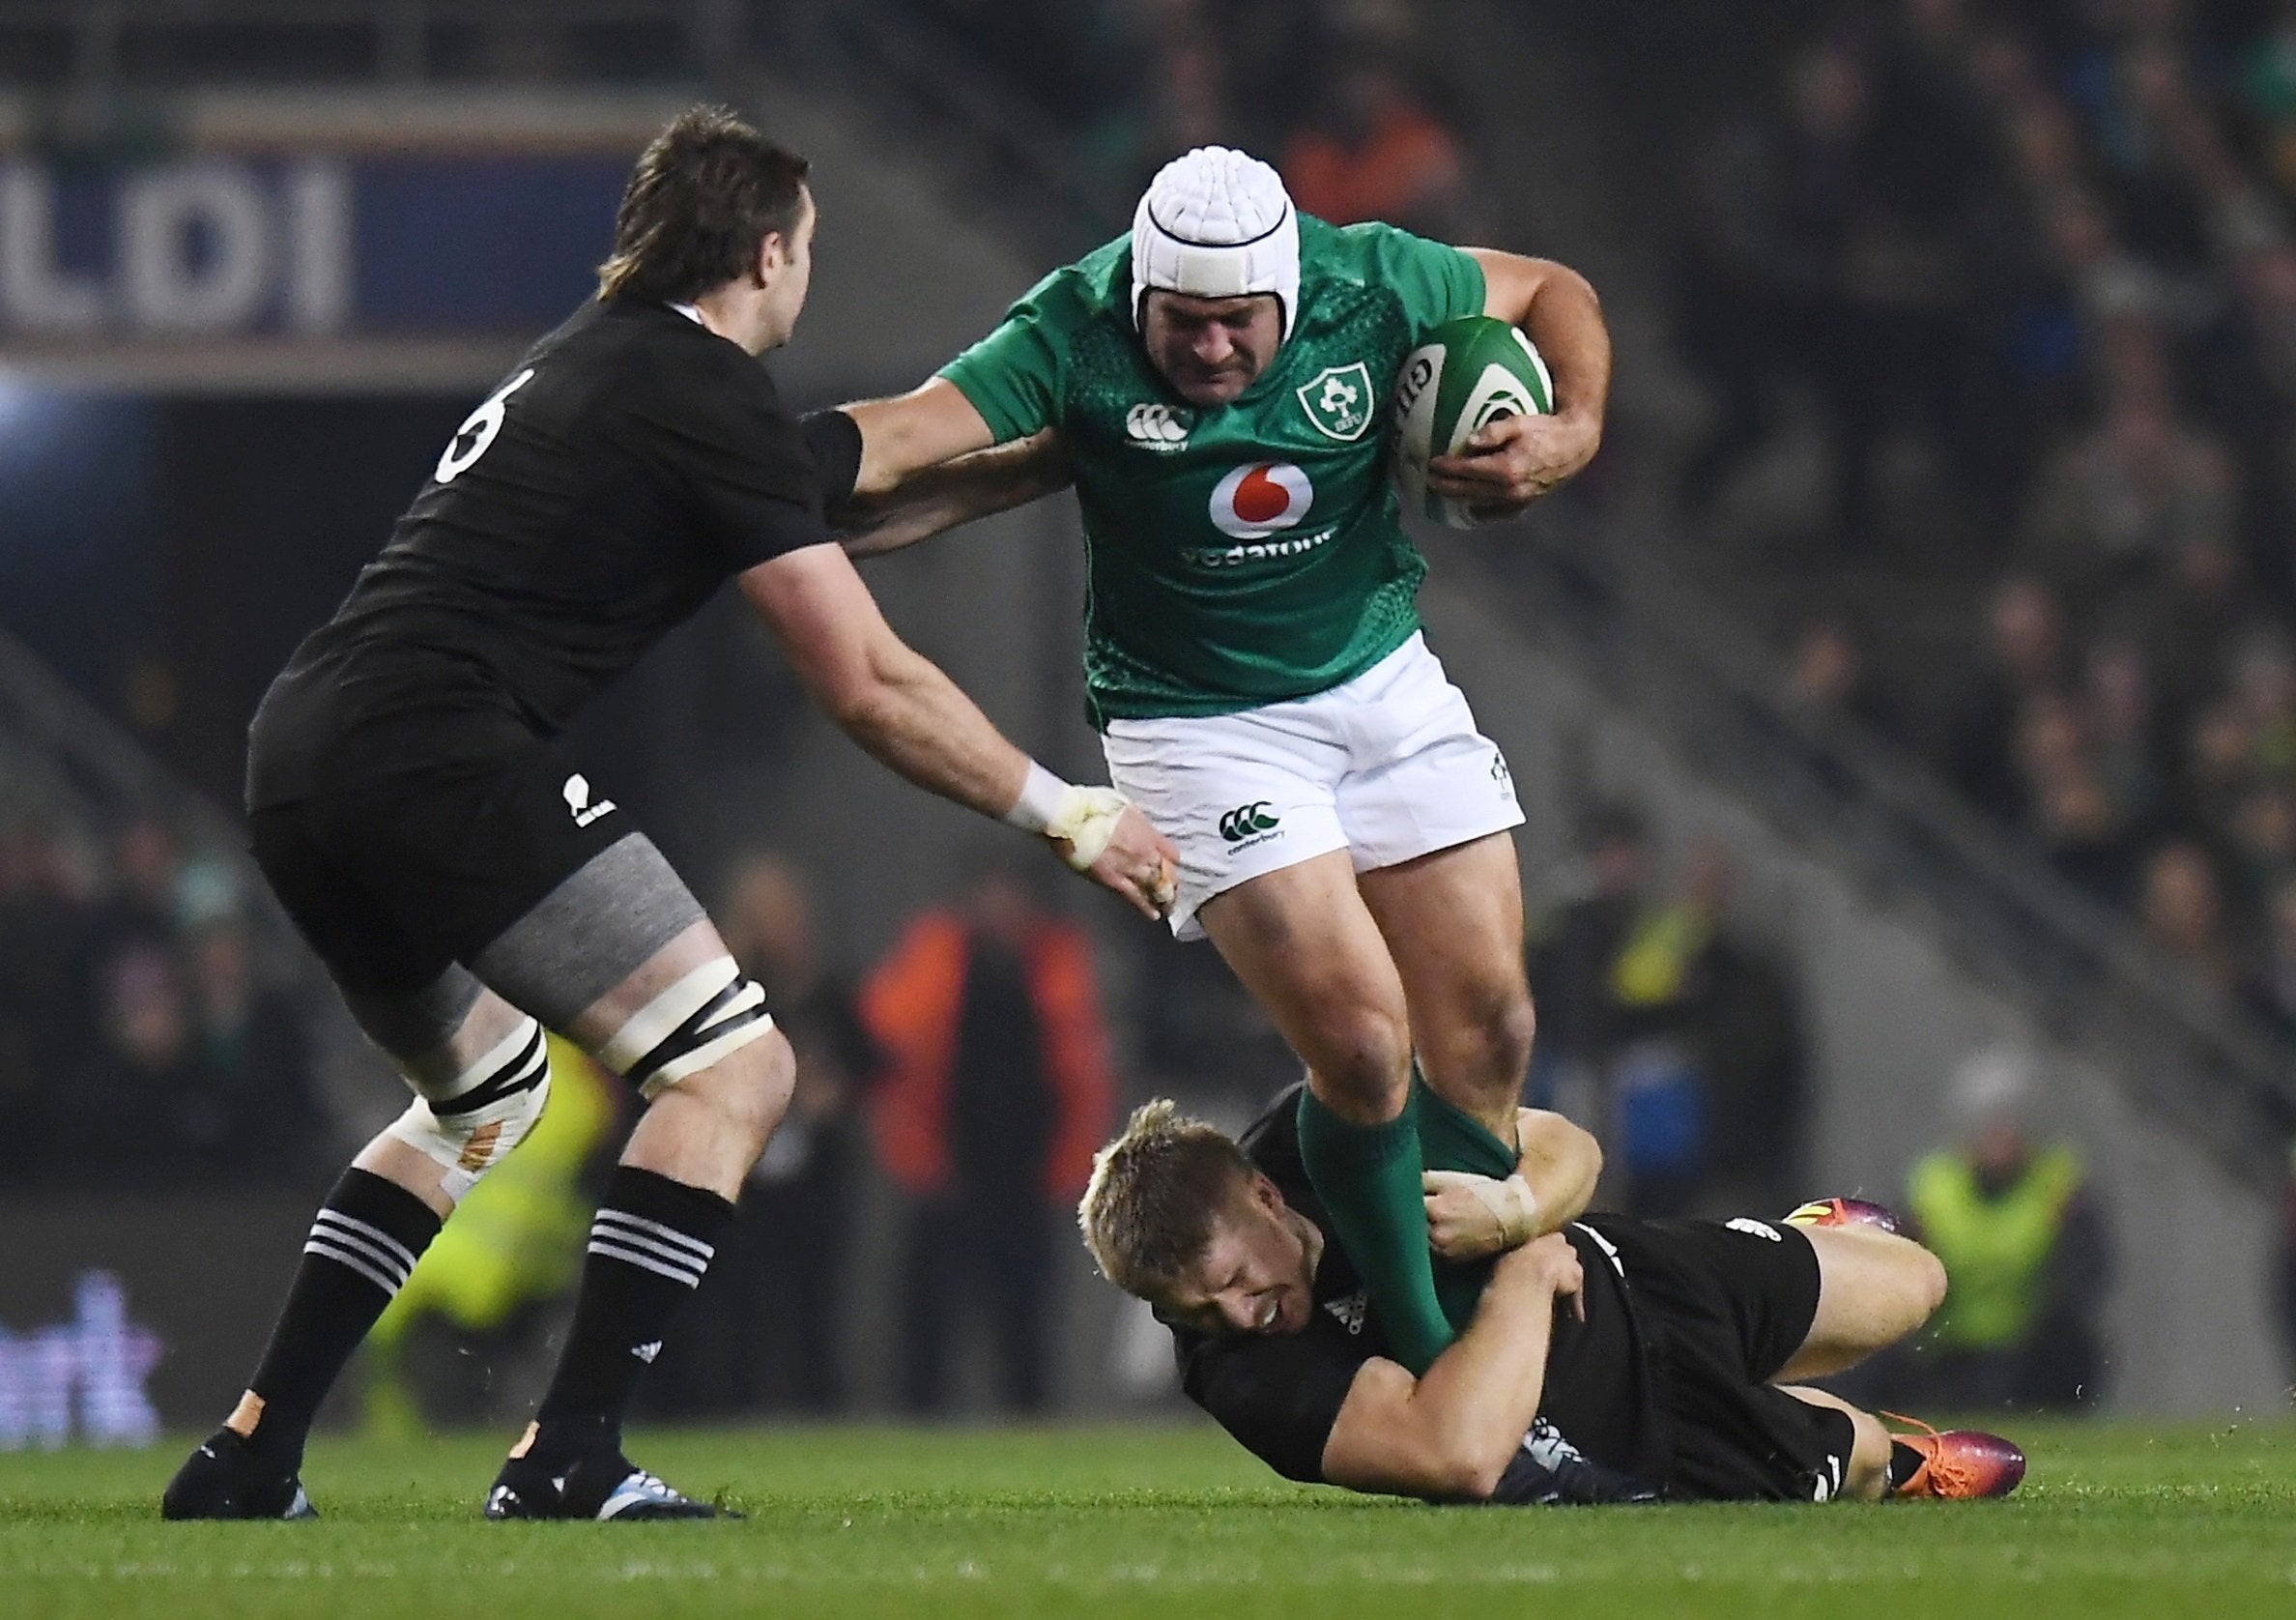 Rory Best carries the ball into contact in midfield